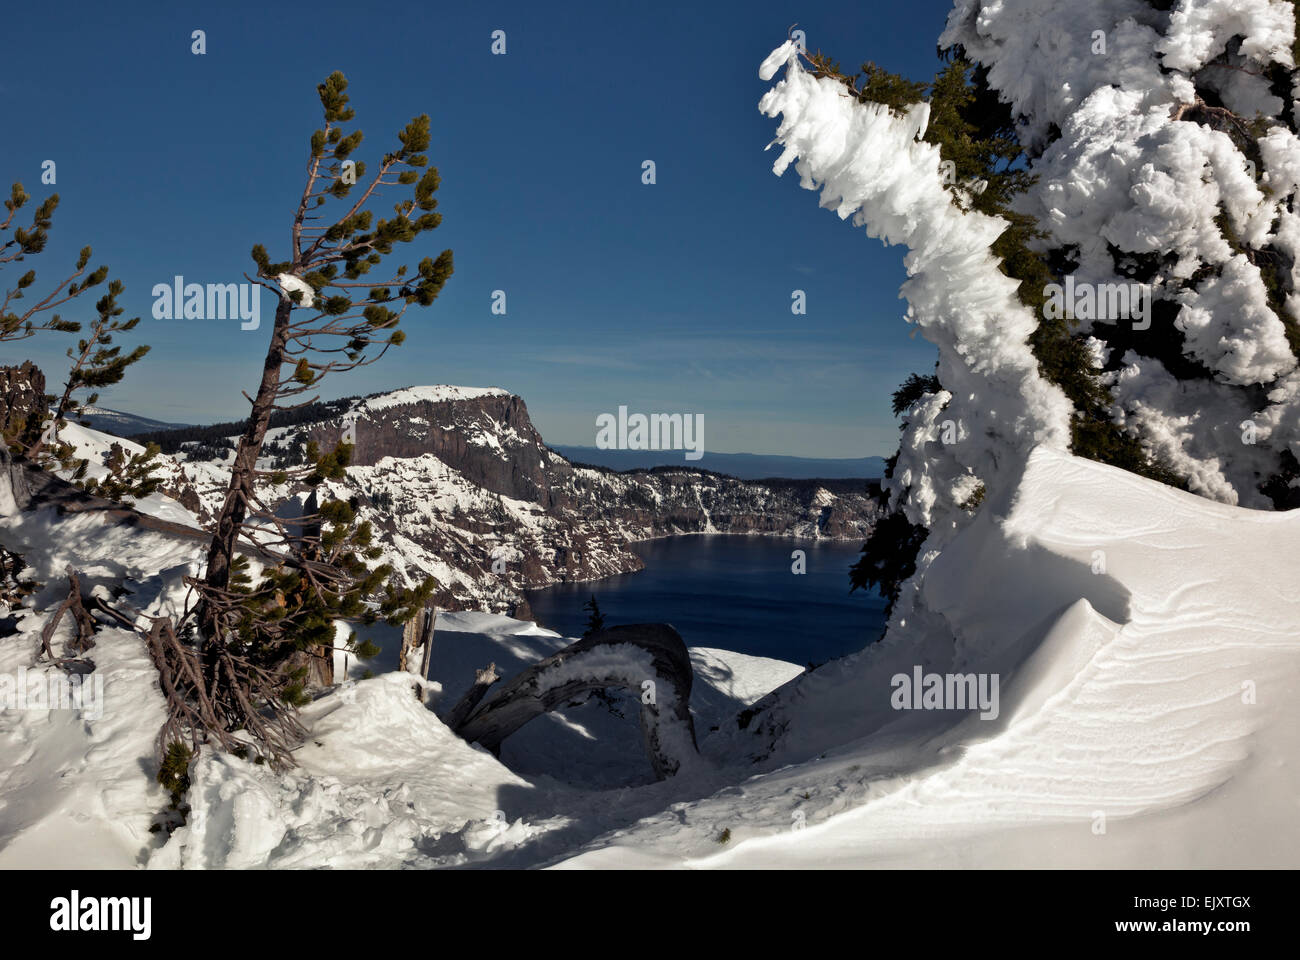 OR02103-00...OREGON - Snow plastered trees along the rim of Crater Lake in Crater Lake National Park. Stock Photo